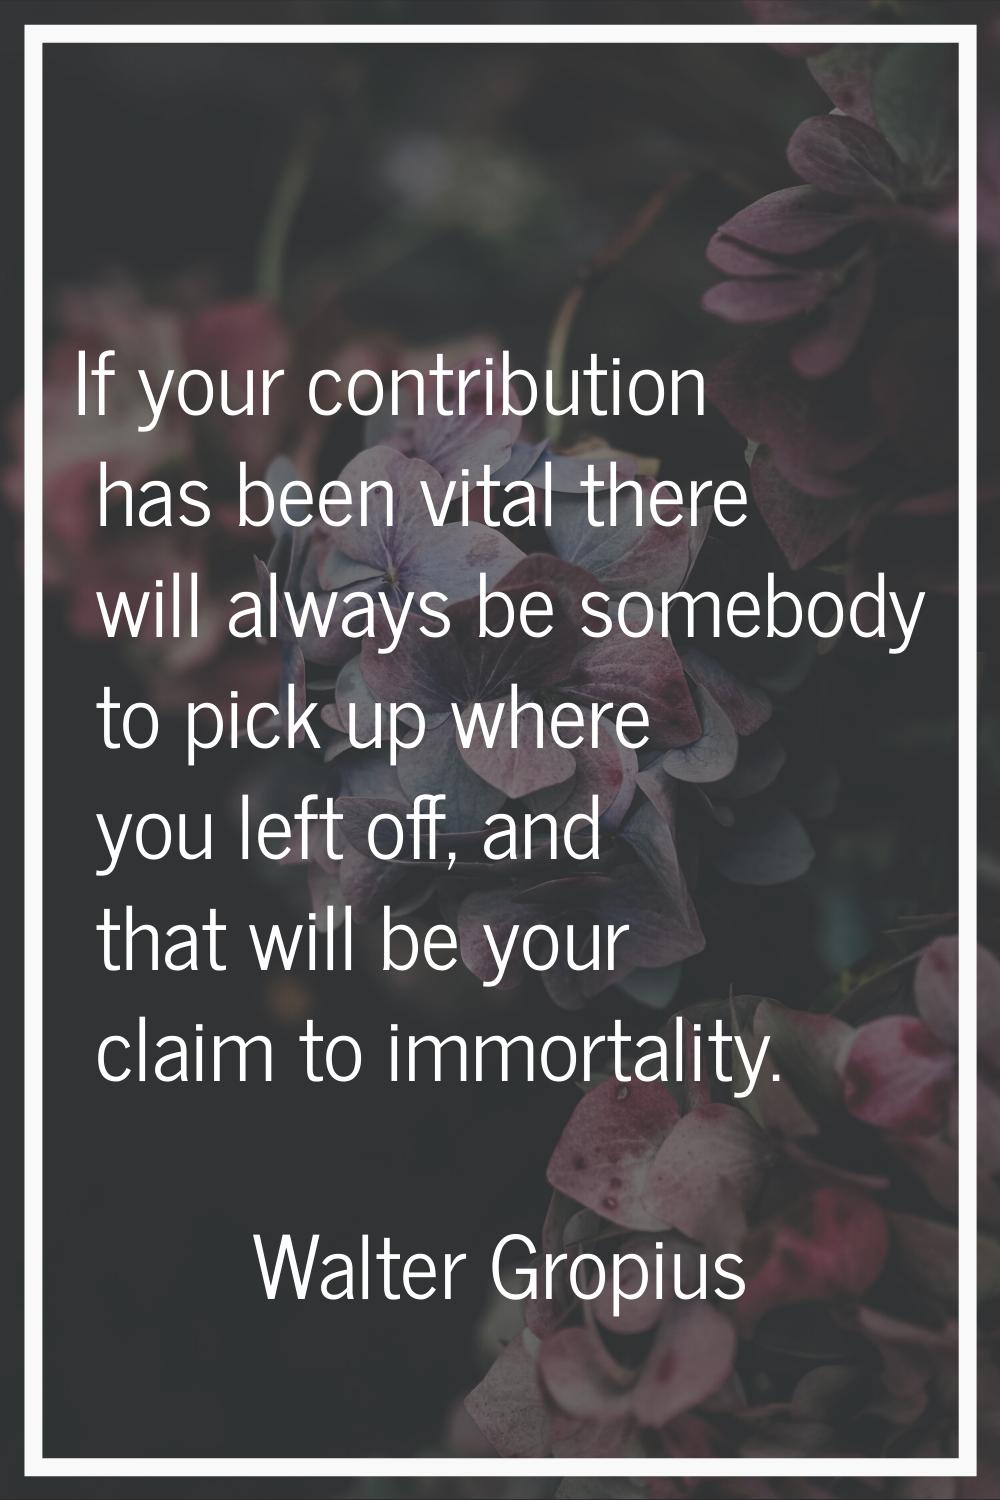 If your contribution has been vital there will always be somebody to pick up where you left off, an